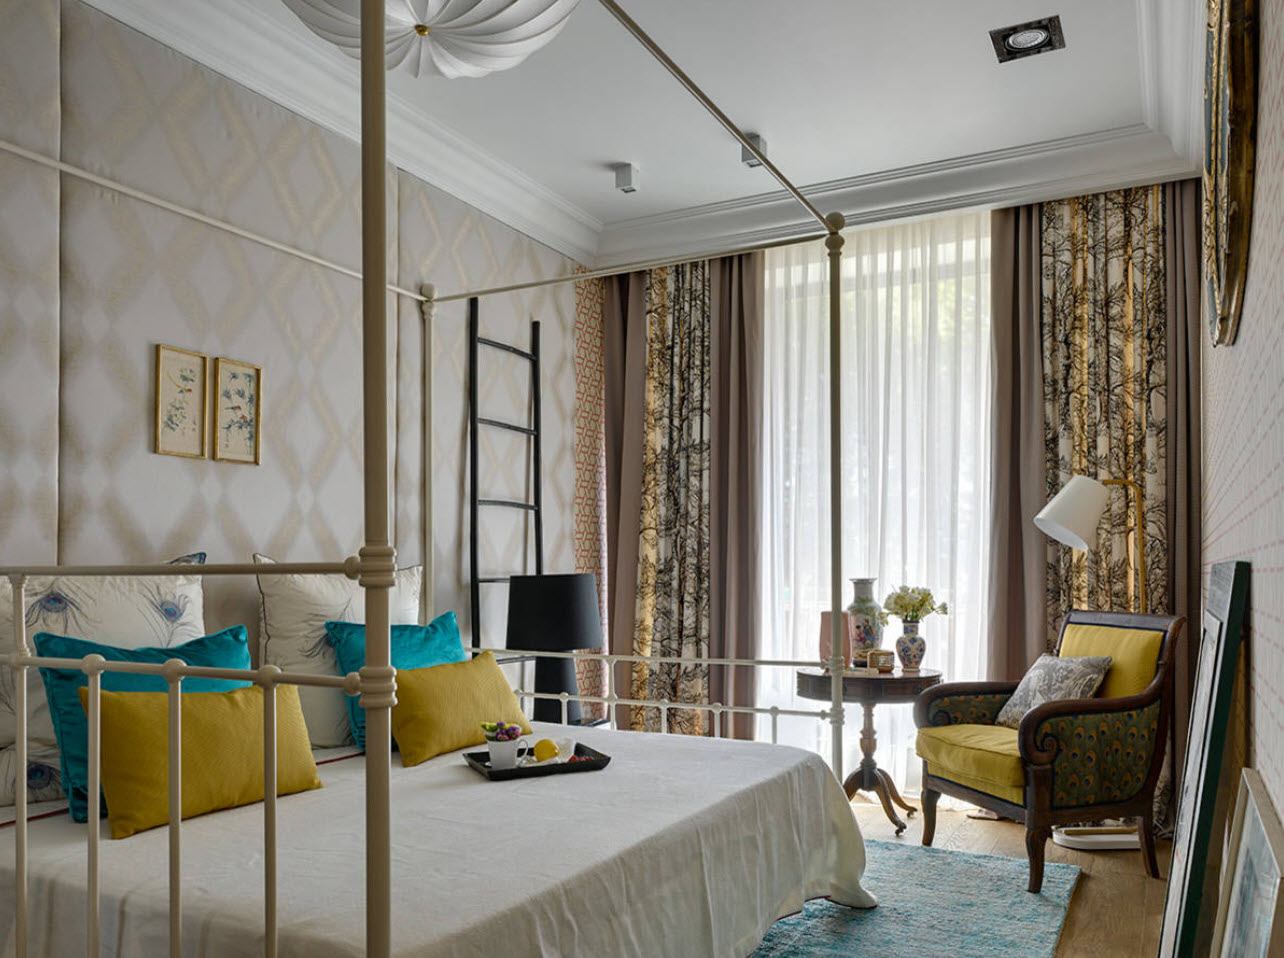 Bedroom Curtains: Full Guide on How to Decorate the Windows. Yellow pillows and canopy bed for large space